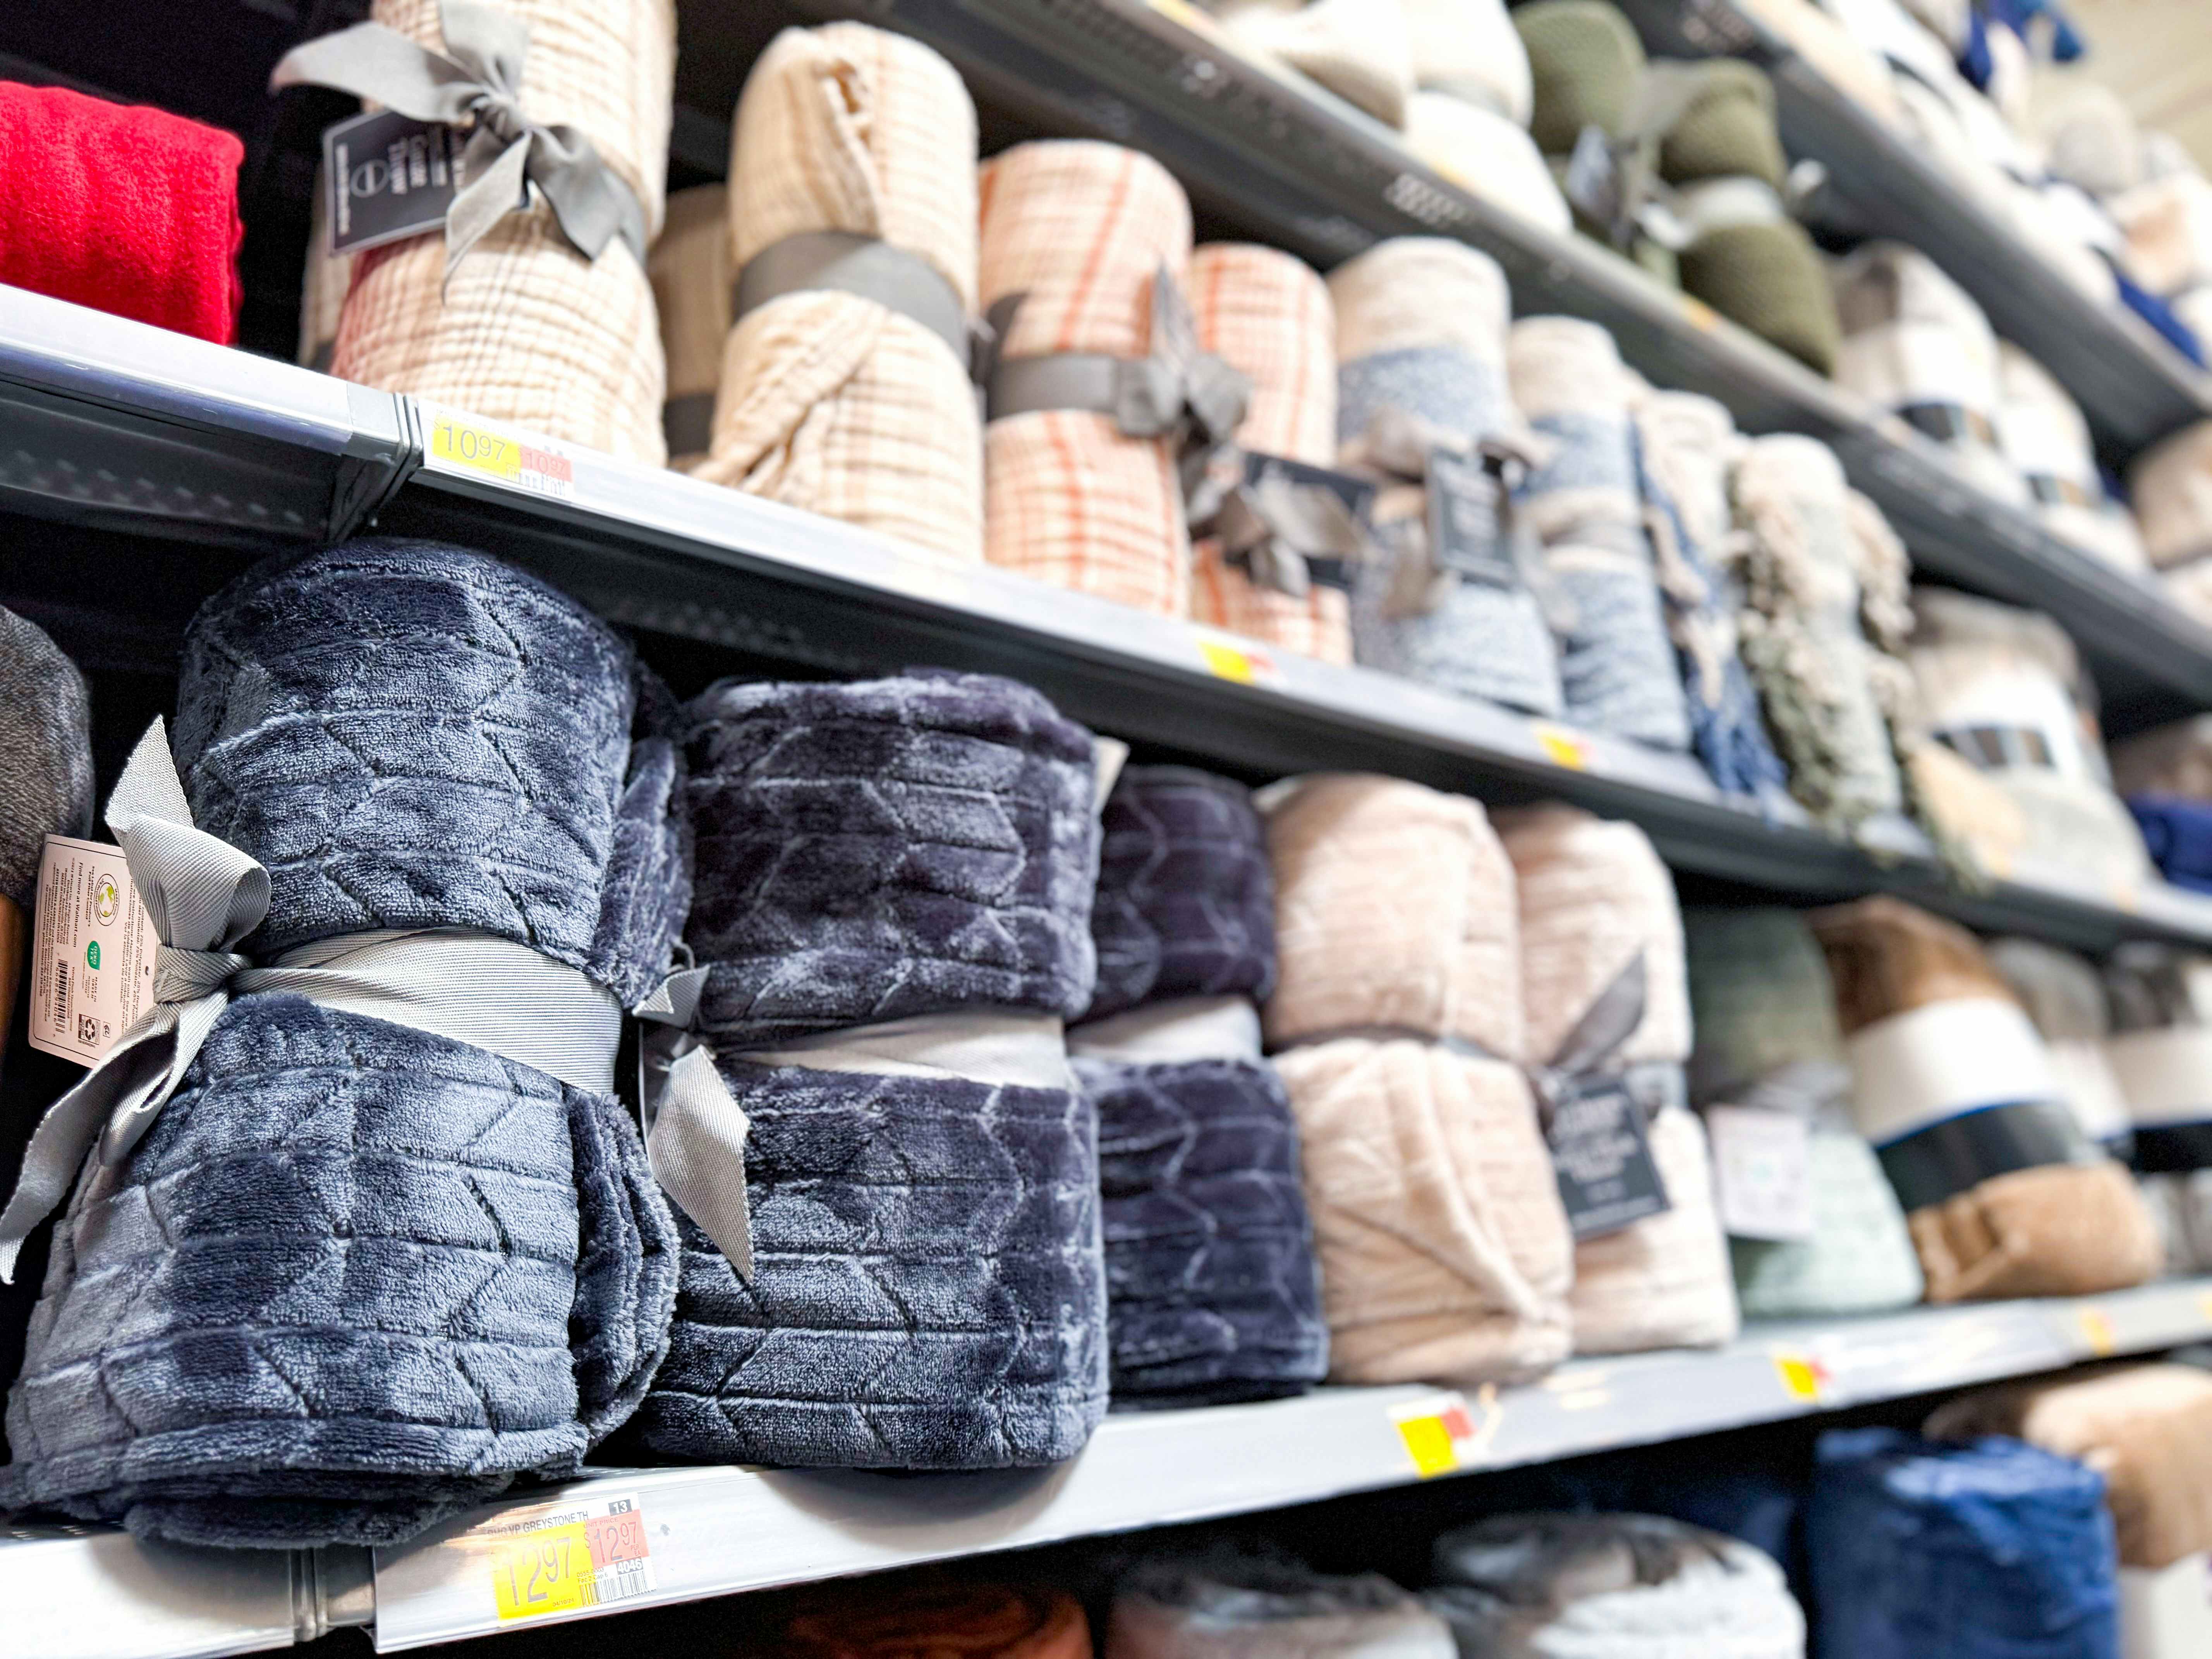 Clearance Throw Blankets Still in Stock at Walmart — Prices Start at $6.48